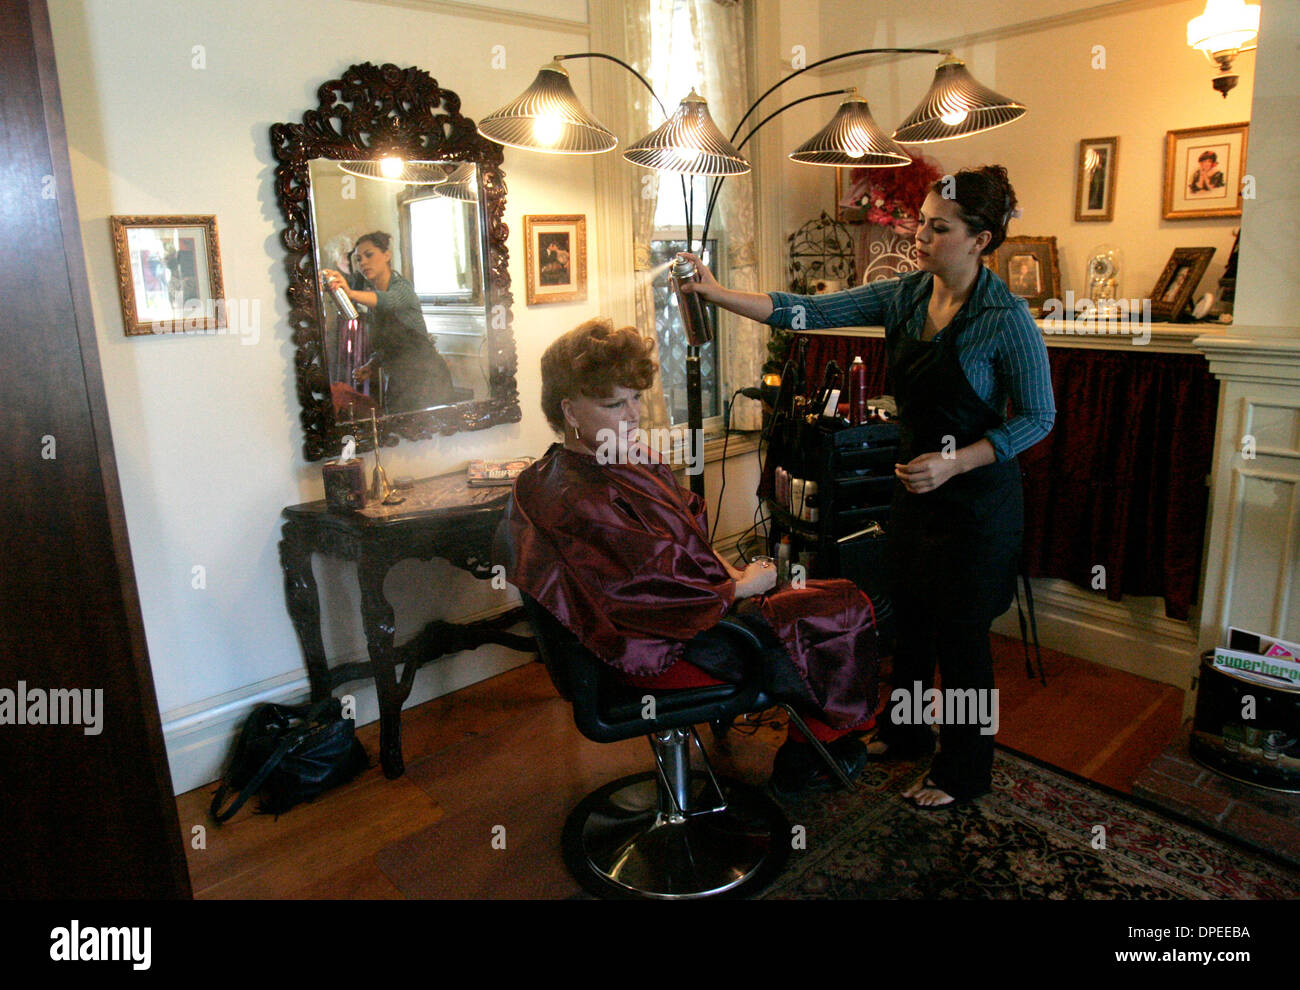 Luchtvaartmaatschappijen Humaan vergroting PUBLISHED 10/24/2006, C-5) October 19, 2006 National City, CA YESSICA  CERDA(cq)owns her own hair salon in a rowhome in National City. The salon  is unique because it has a completely Victorian Era